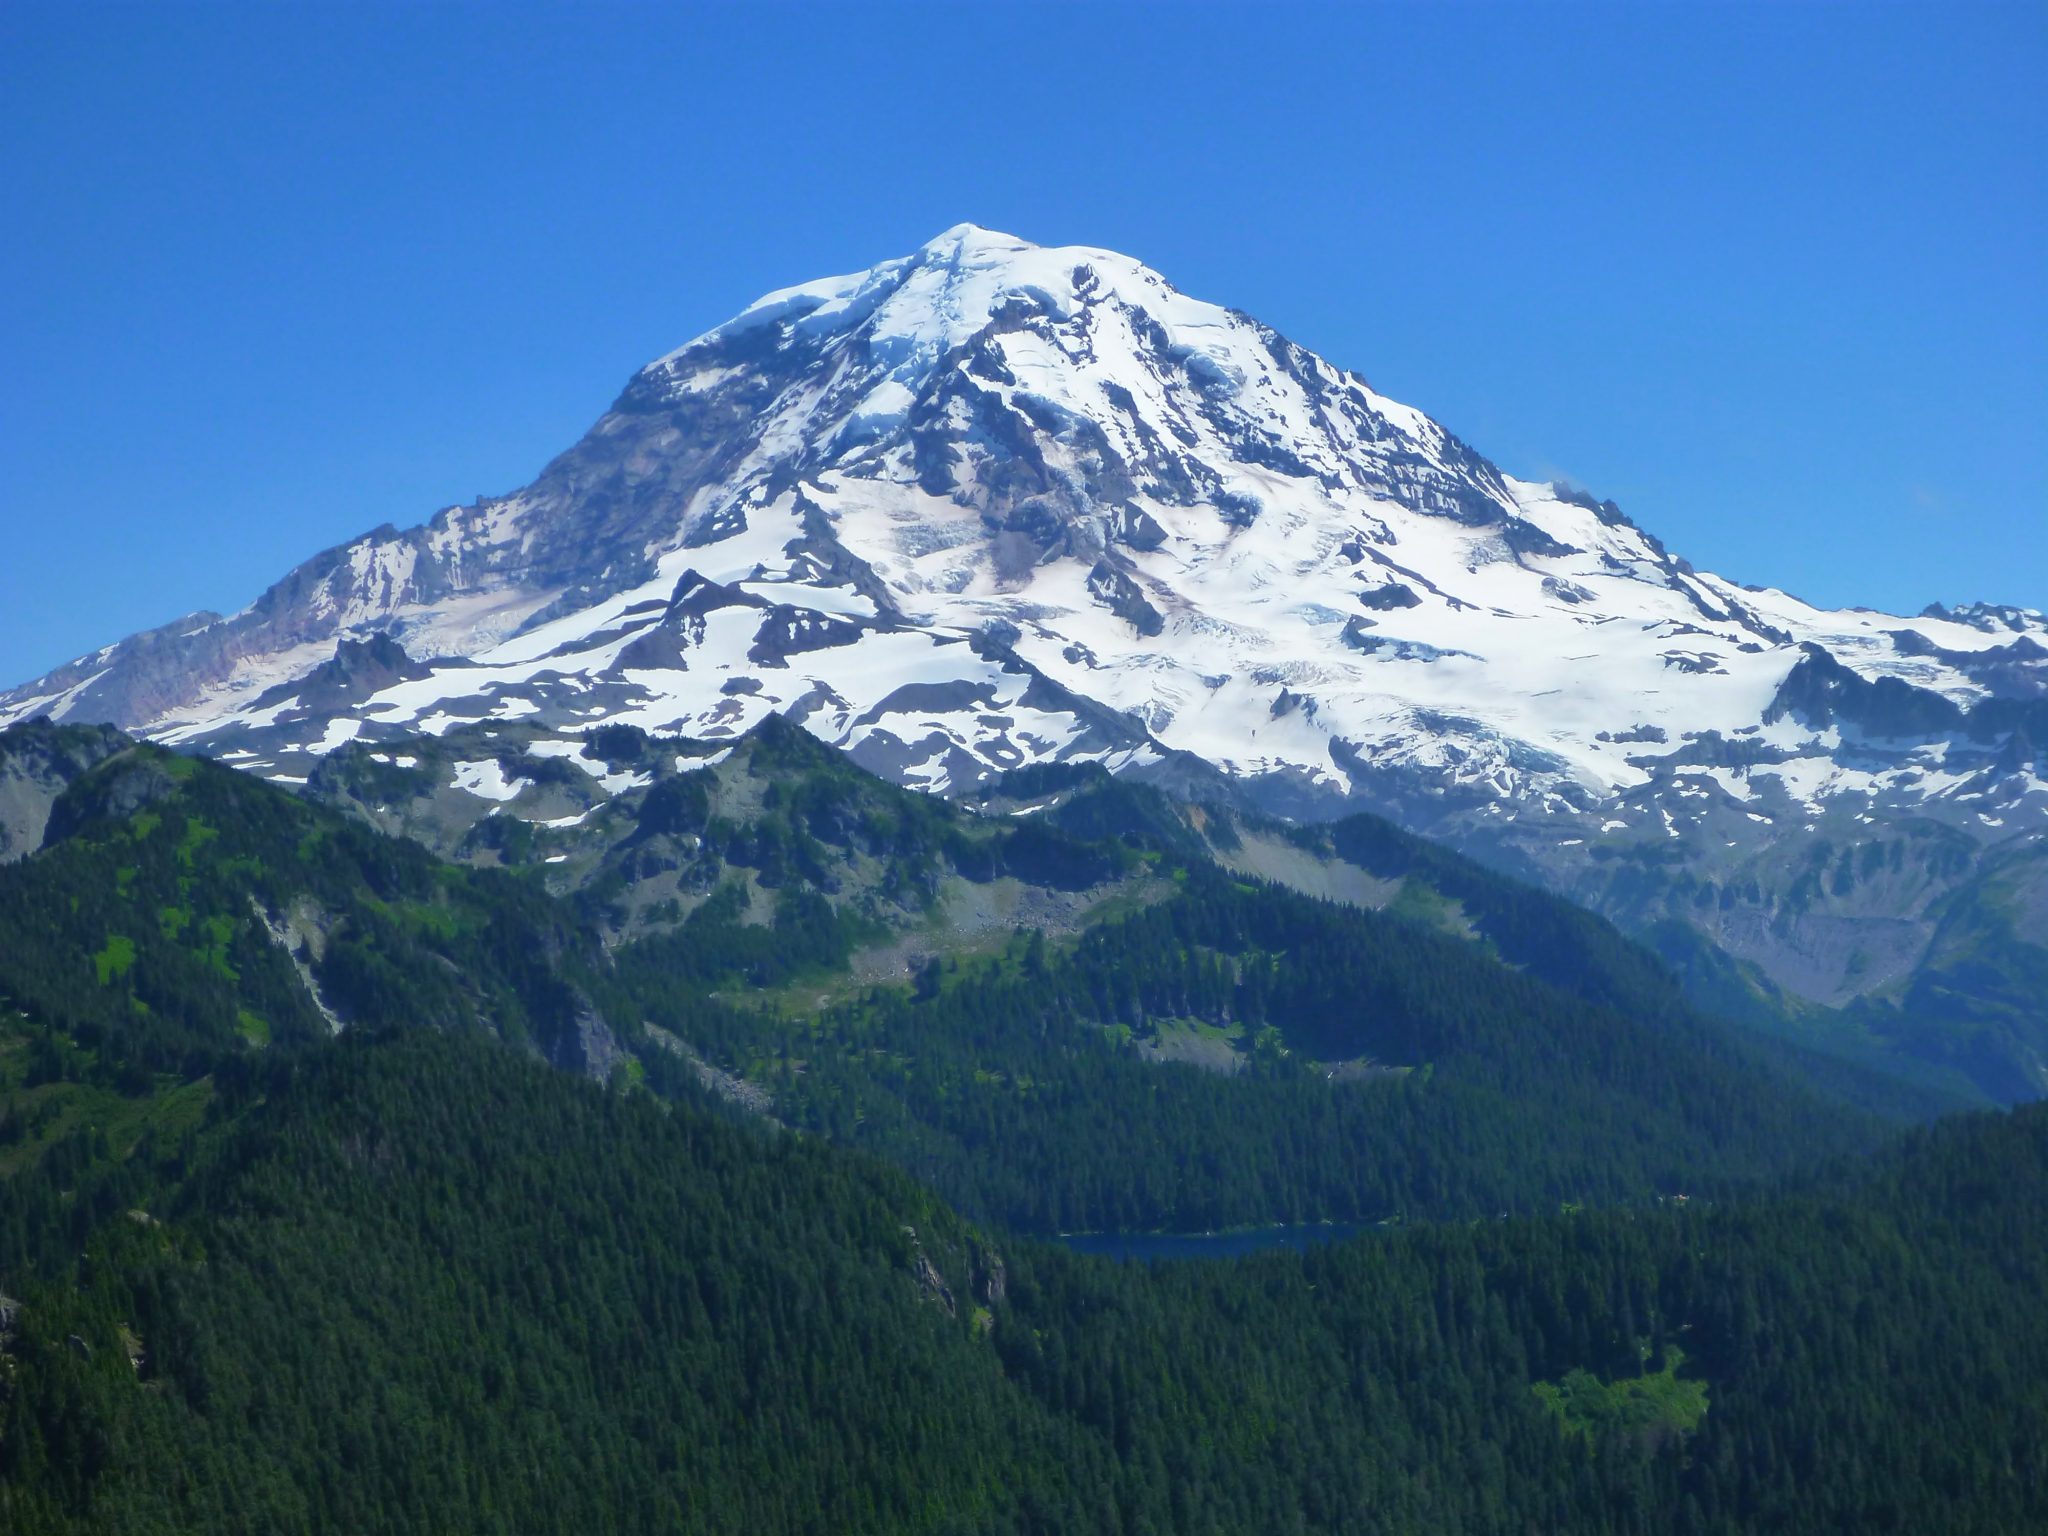 The Tolmie Peak Lookout hike has epic views of Mt Rainier. Here it is filling the frame against a clear blue sky with forested hillsides in the foreground